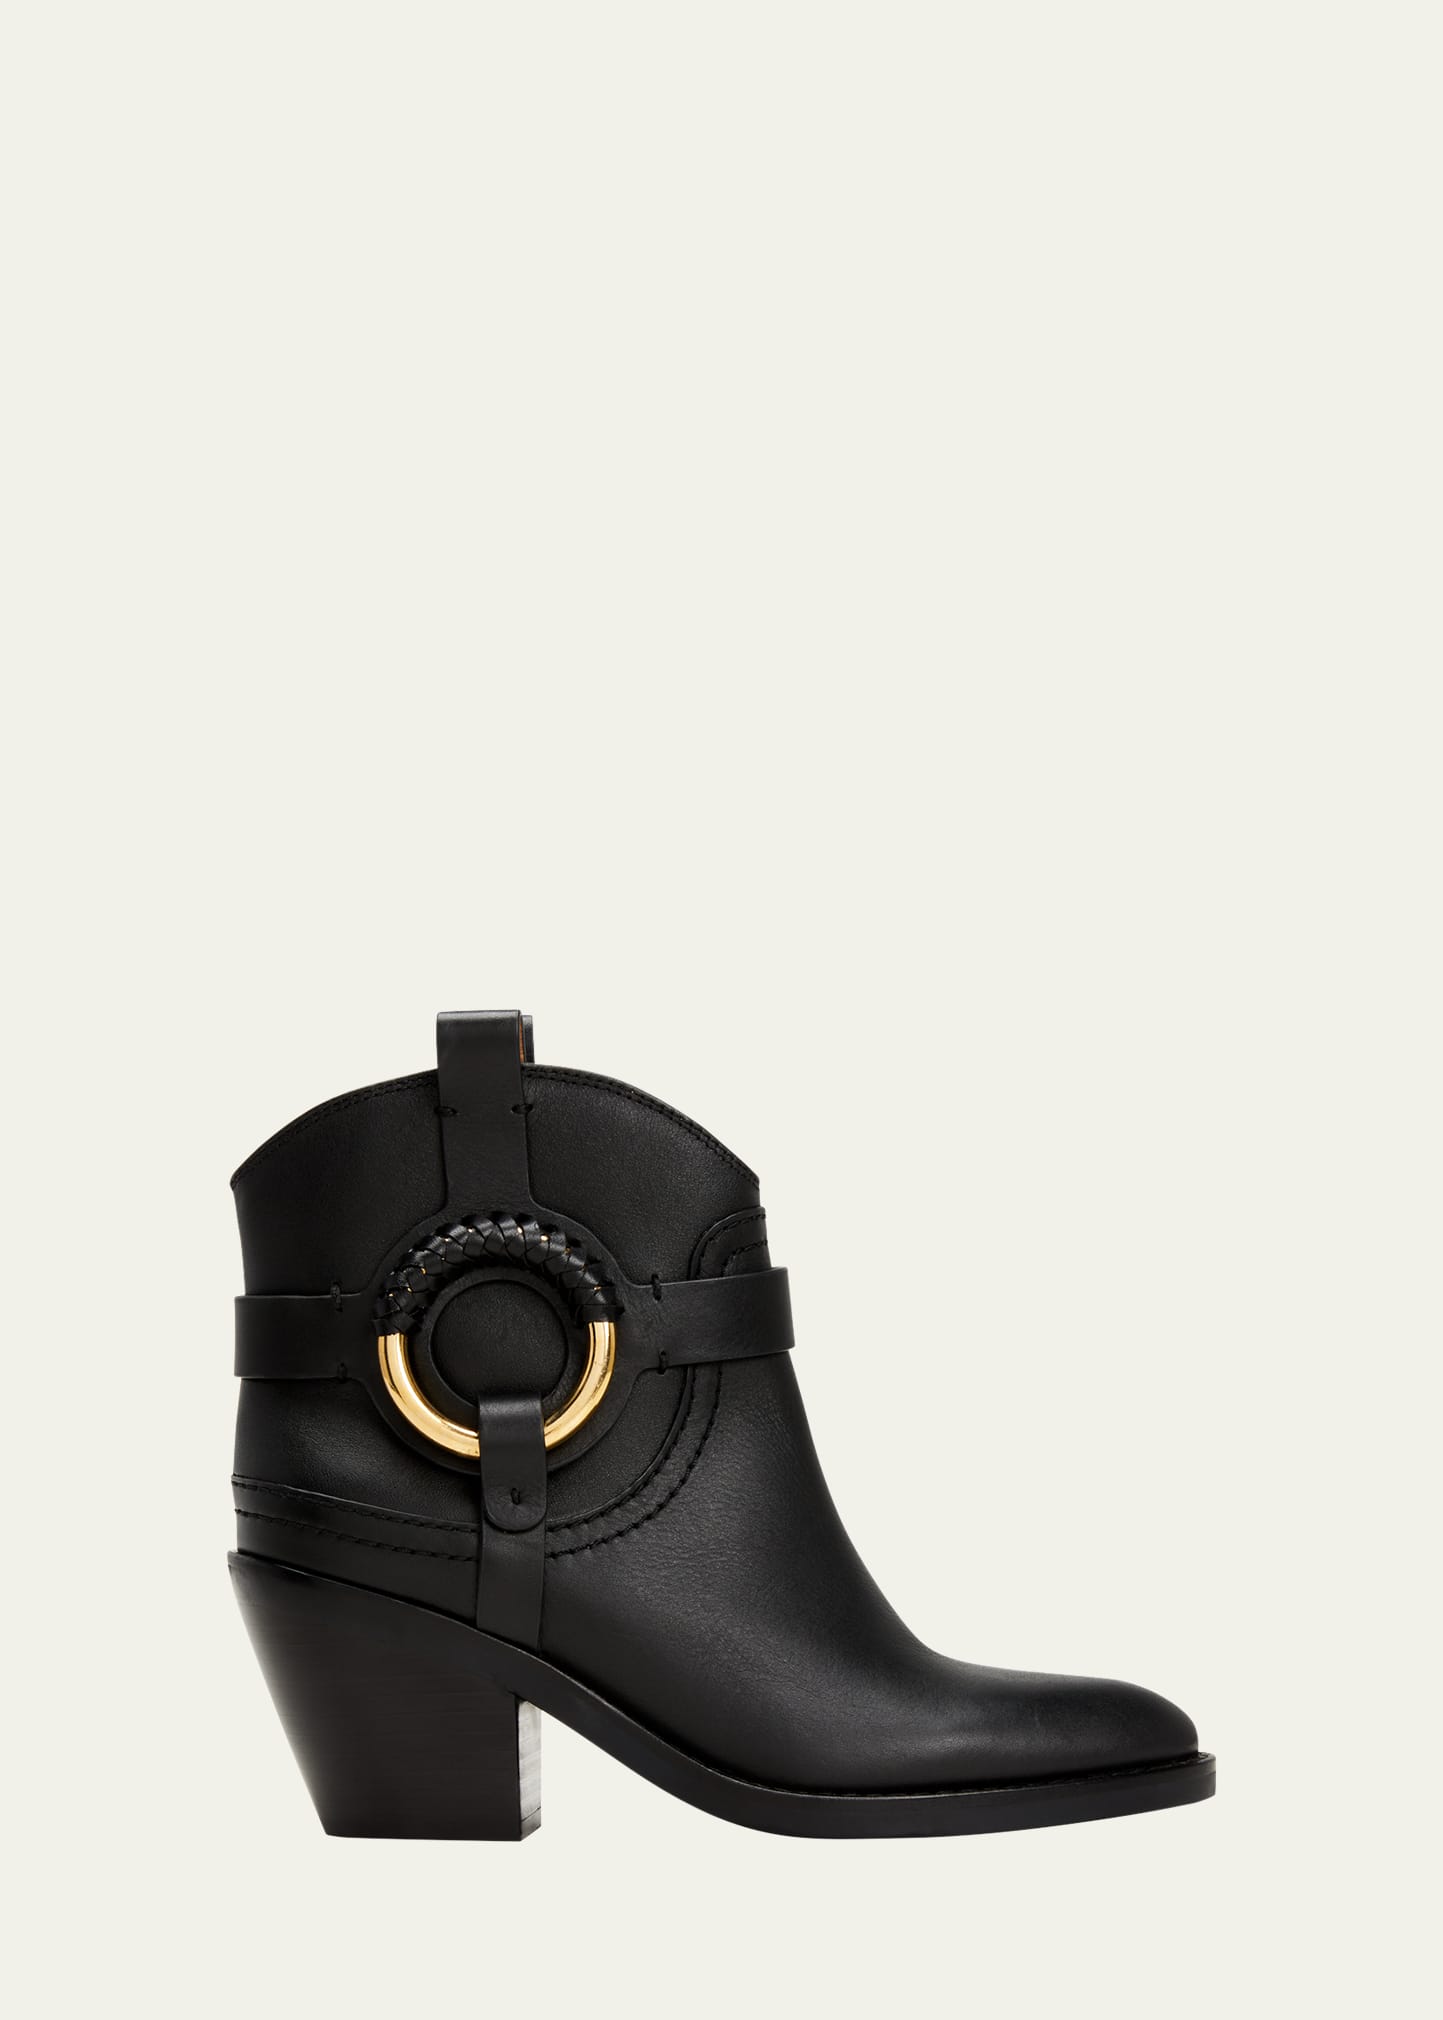 Hana Leather Harness Ankle Boots